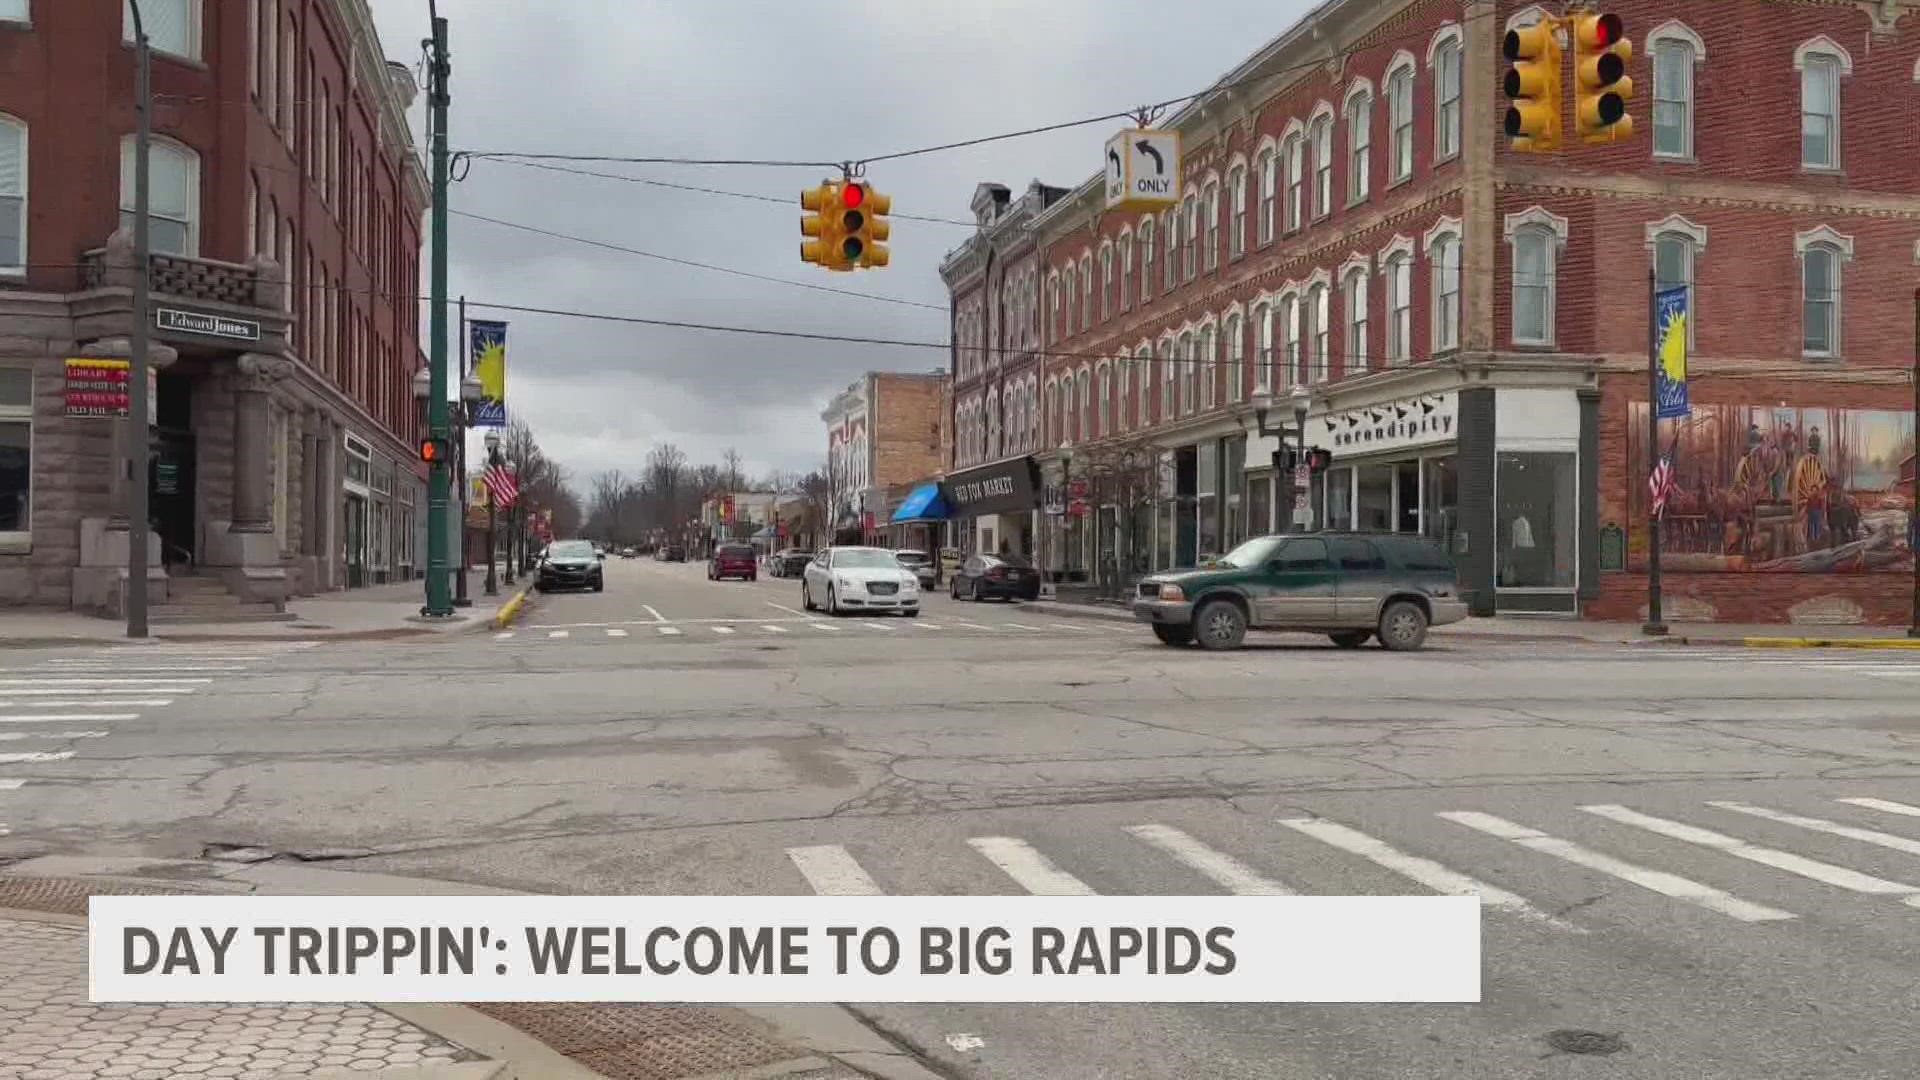 Meteorologist Samantha Jacques and Photojournalist Doug Grevious went to Big Rapids to see all that it has to offer.